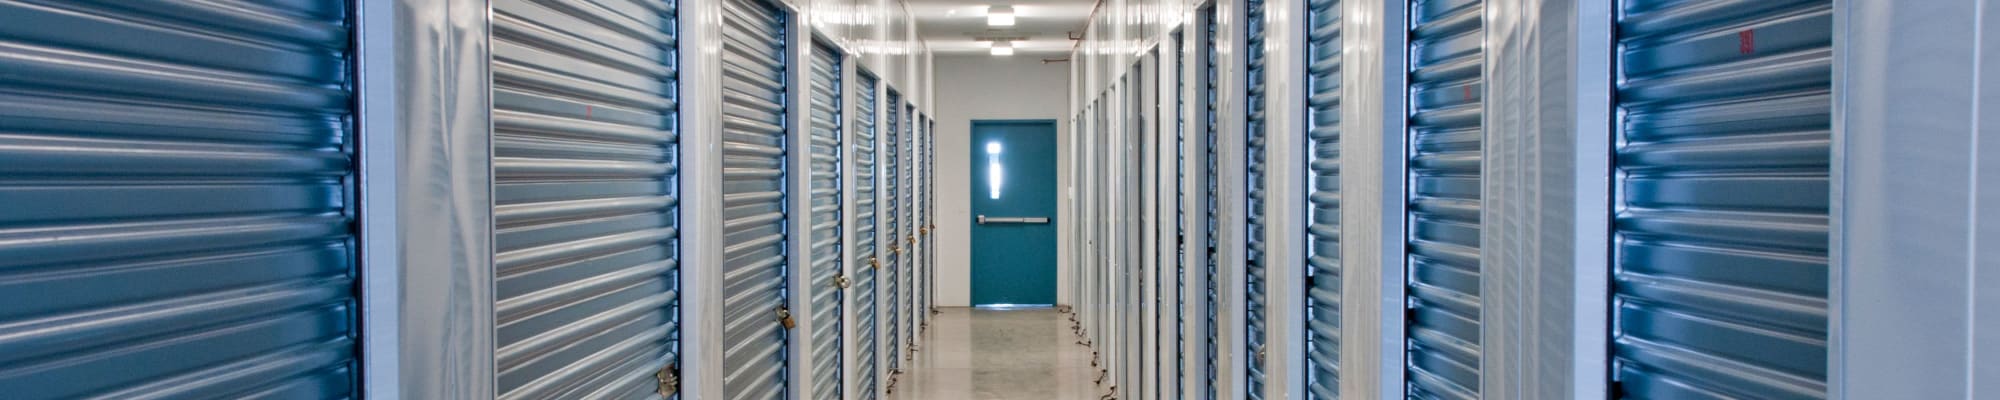 Self storage units for rent in Ewing, NJ